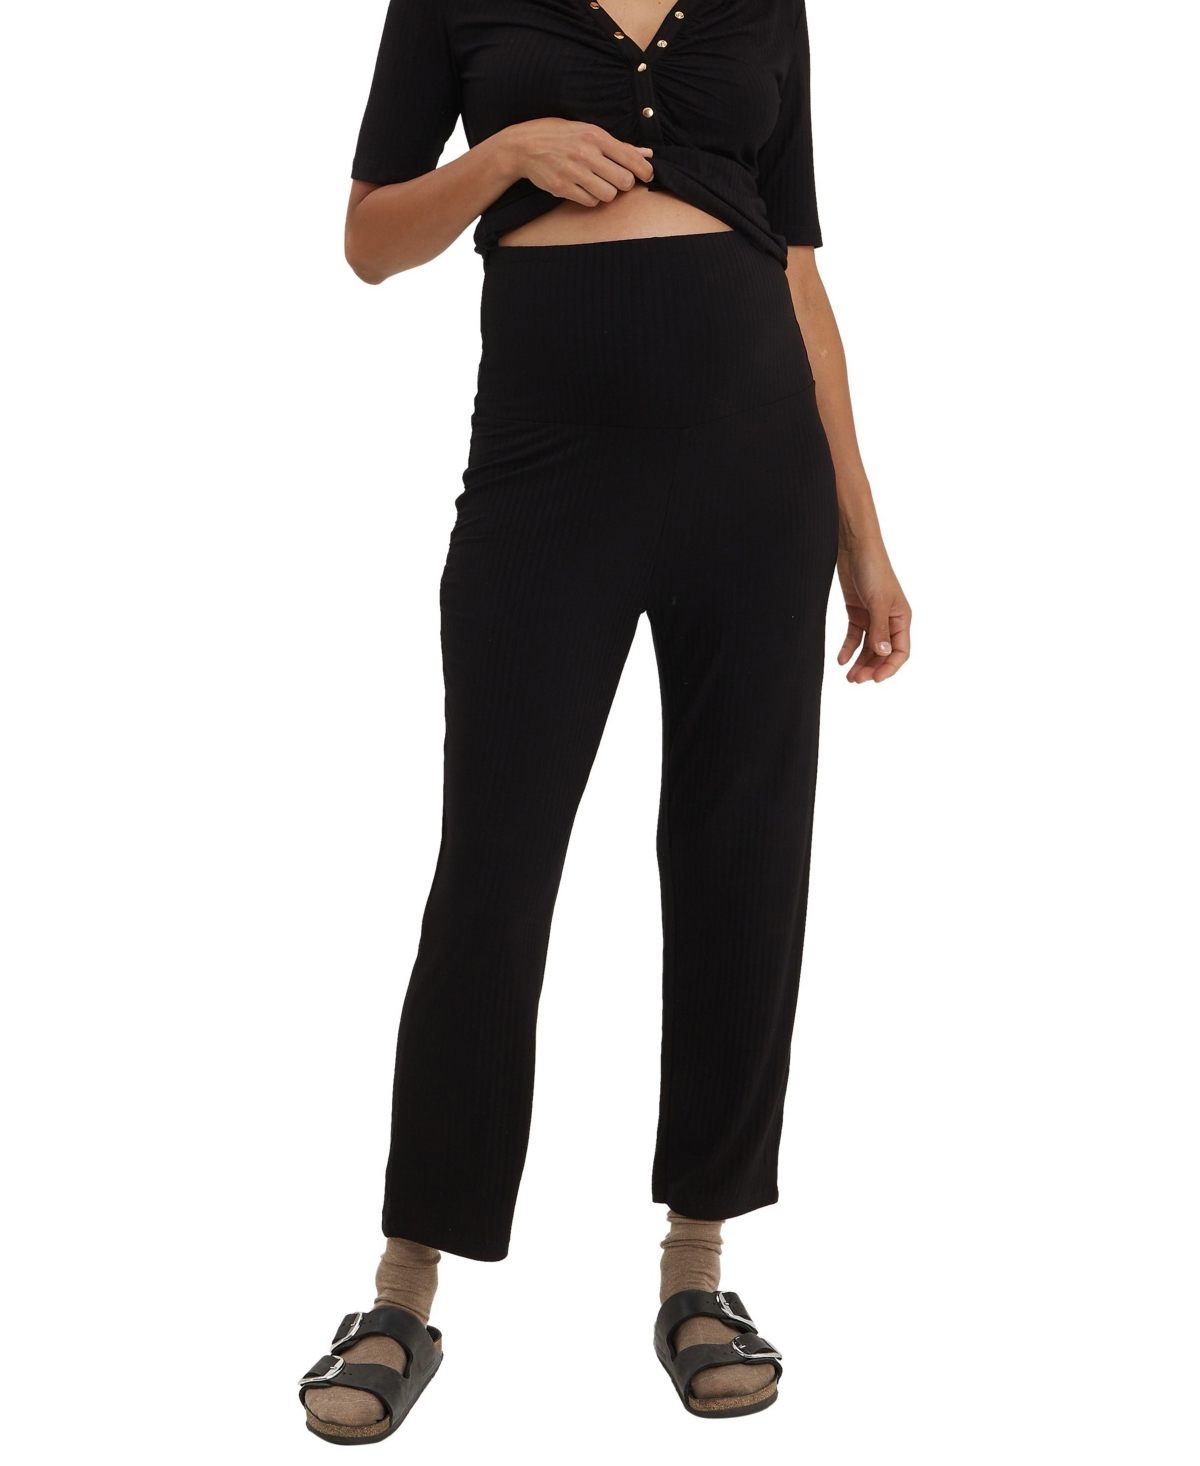 Women's Camilla Over-The-Belly Maternity Pants - Black